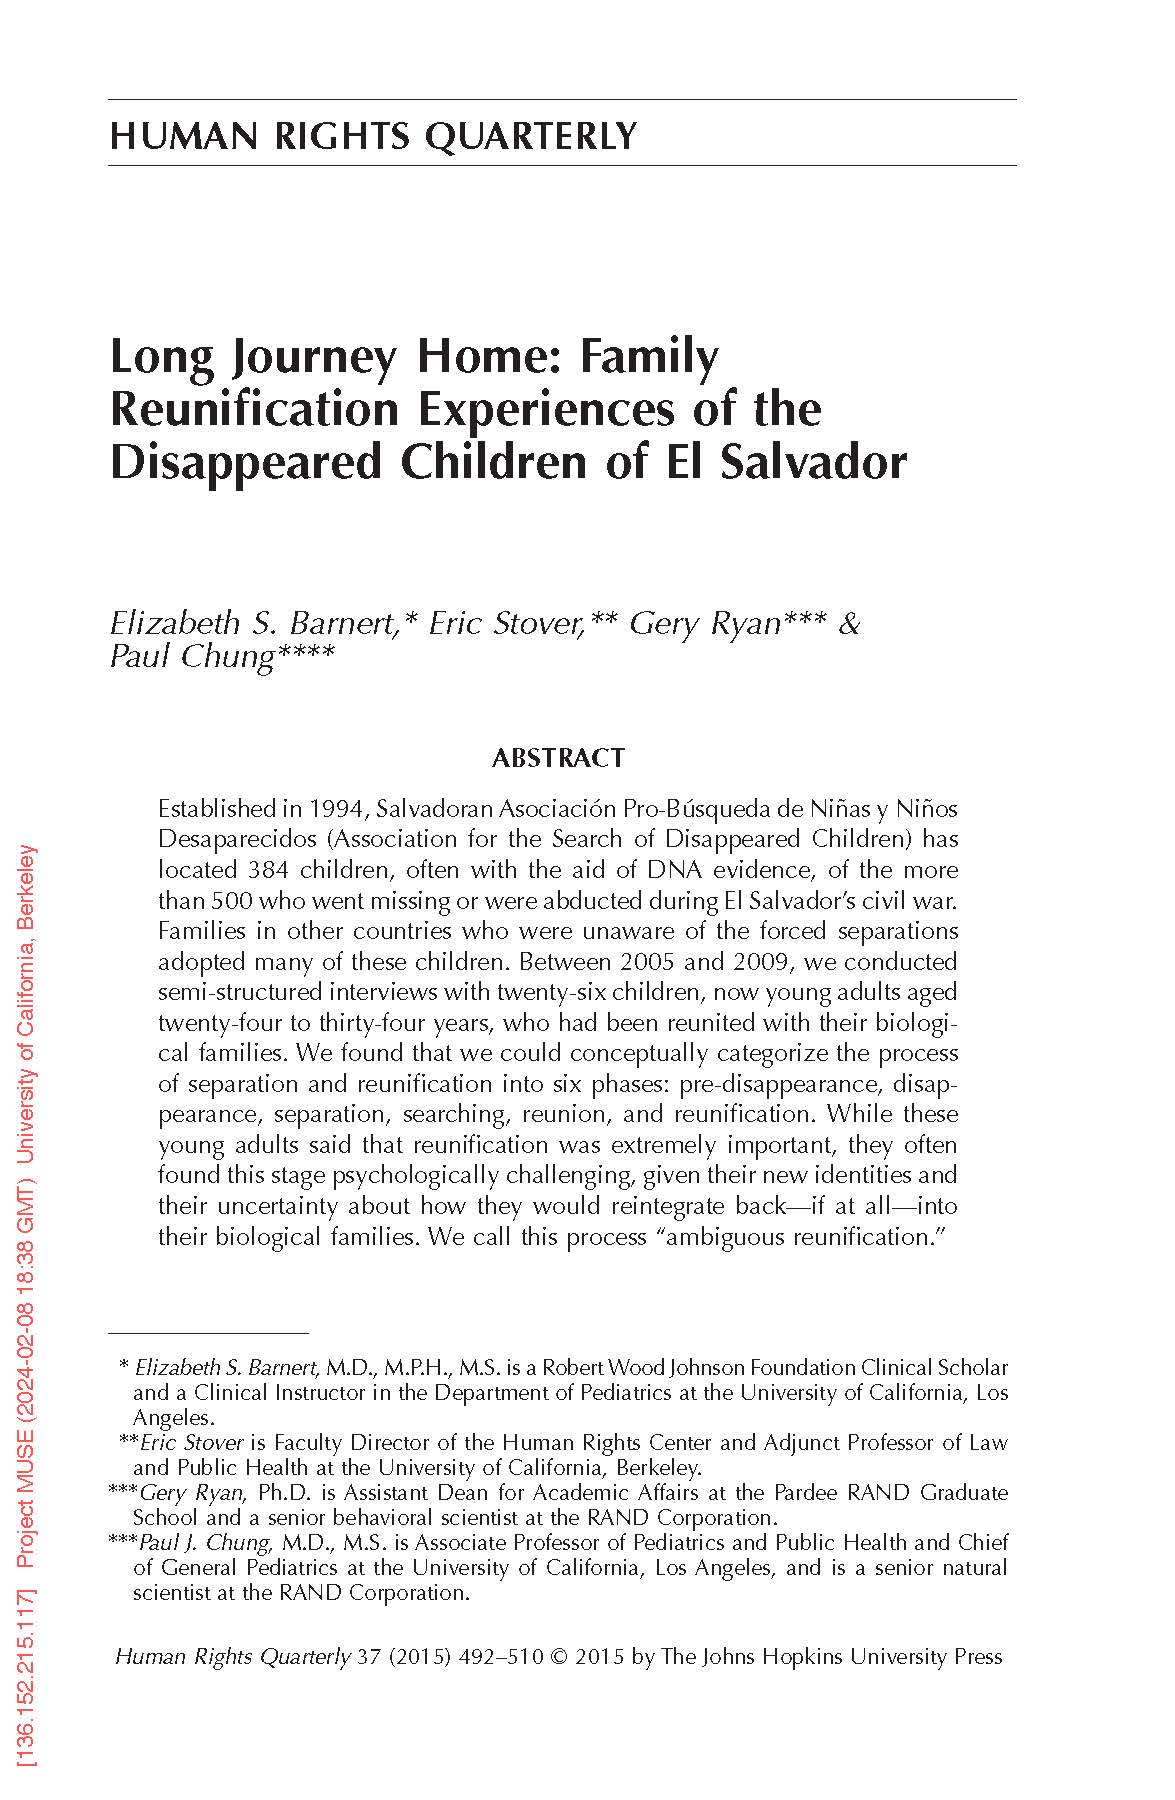 Pages from Long Journey Home- Family Reunification Experiences of the Disappeared Children of El Salvador